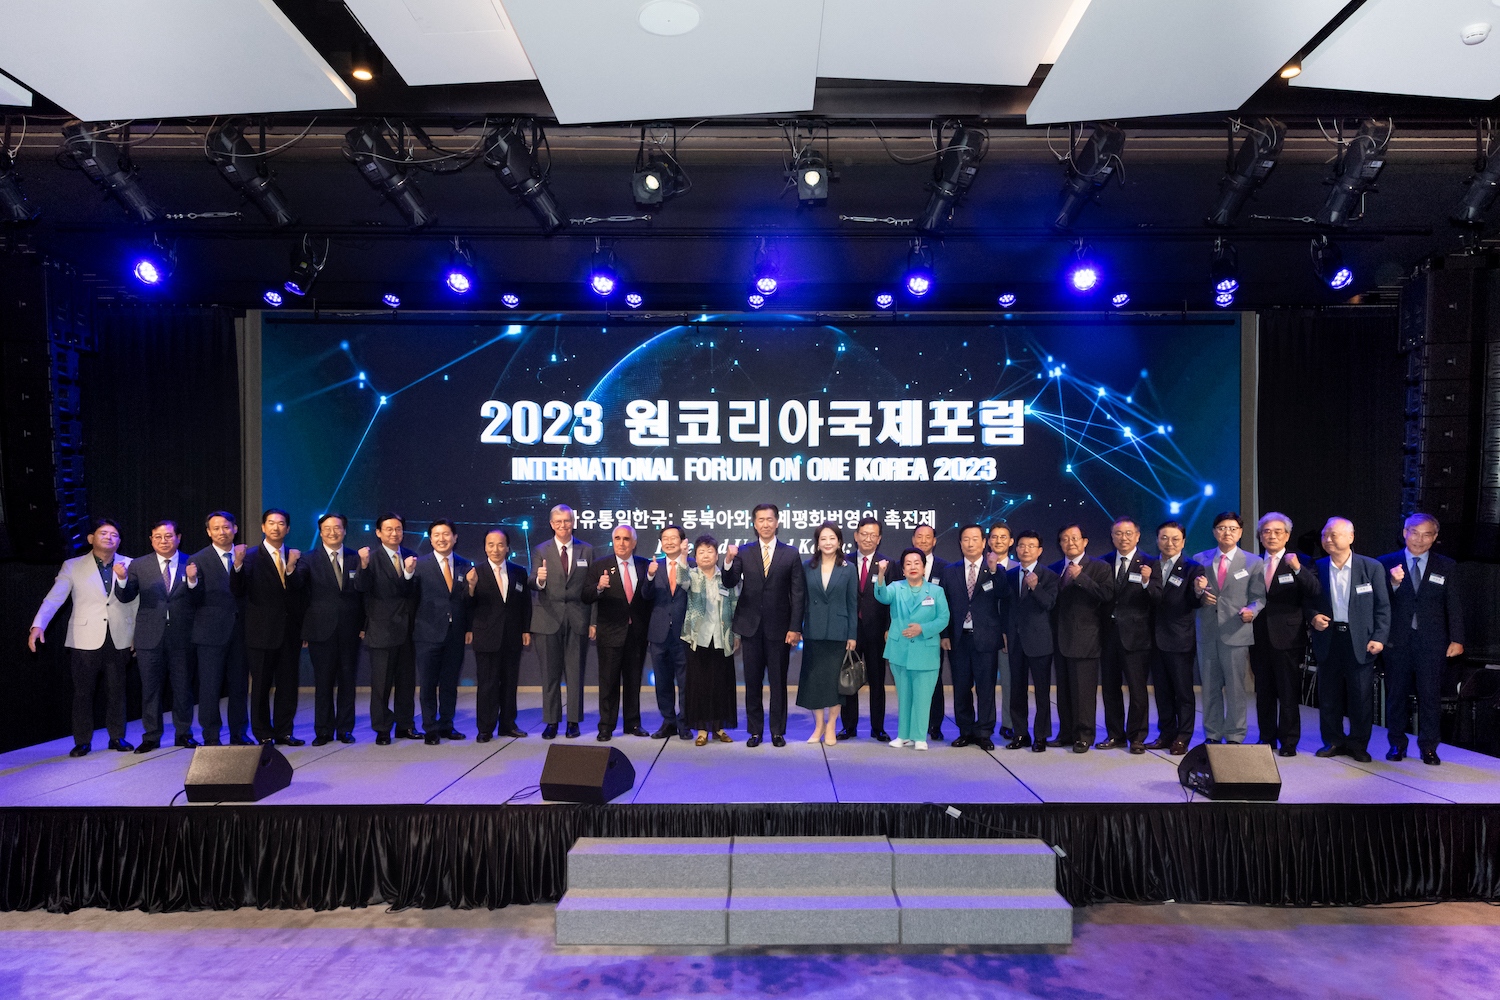 A group of people standing on stage at the International Forum on One Korea 2023 held in Seoul.